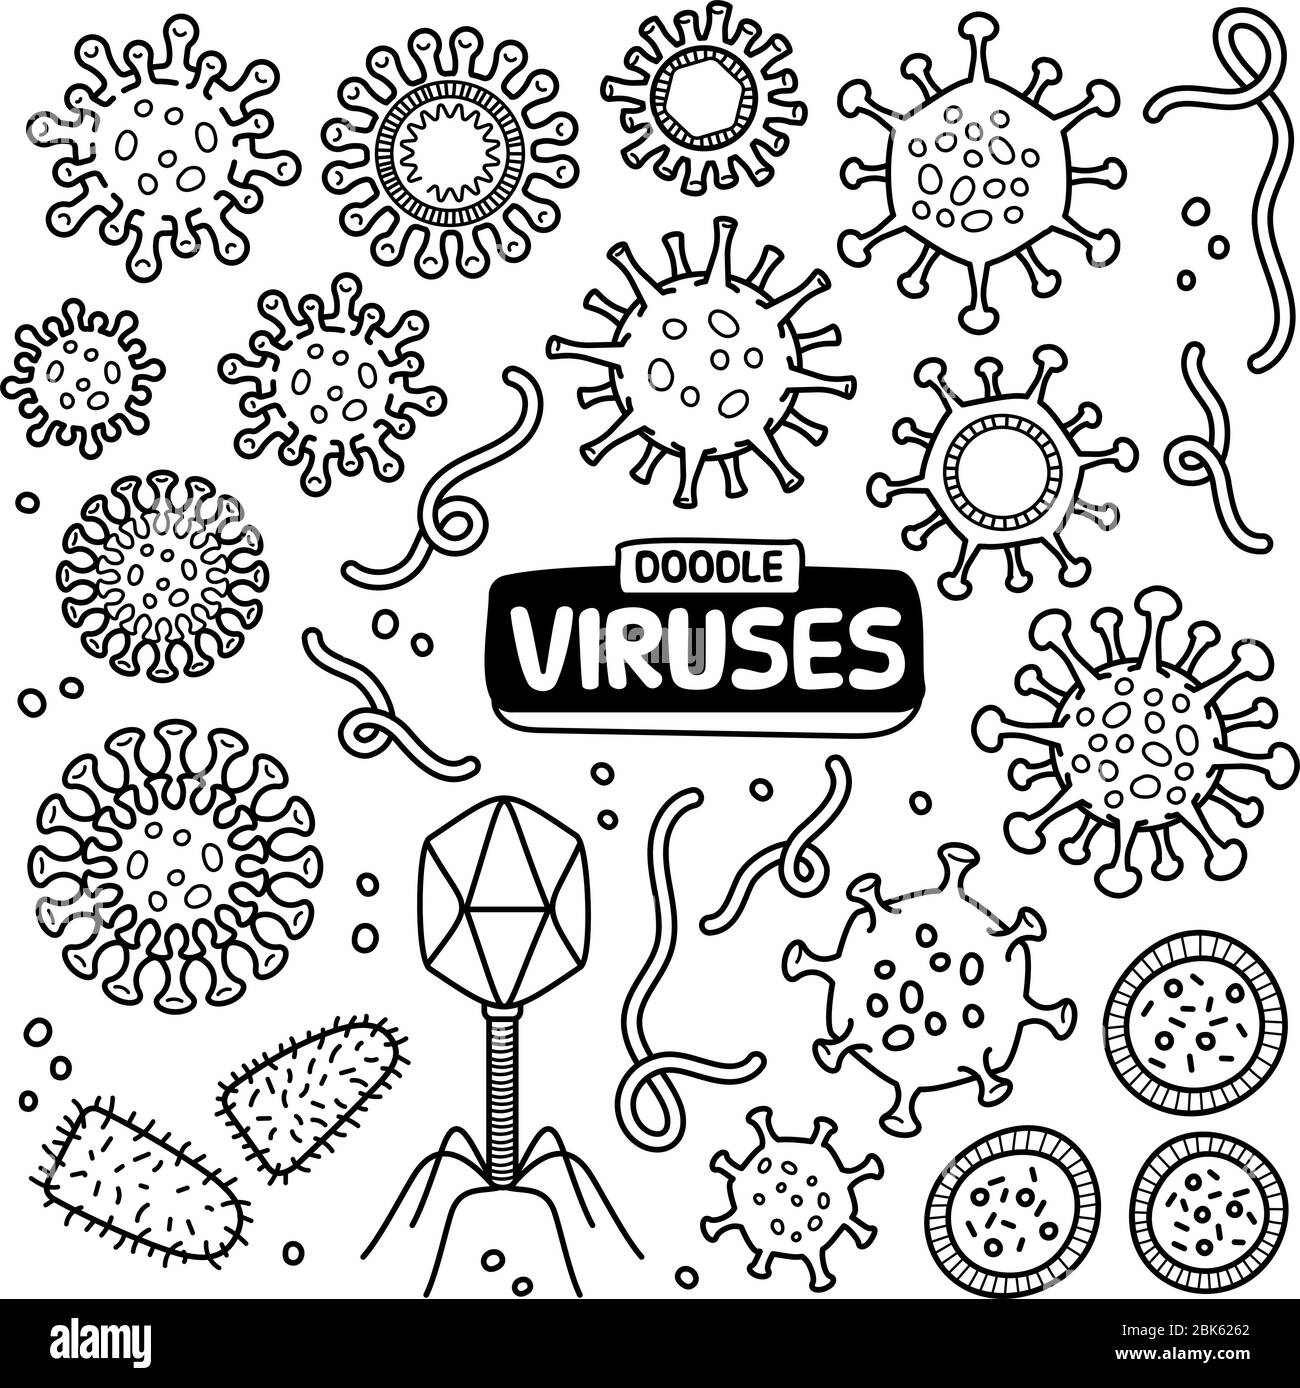 Viruses doodle drawing collection. Microorganism such as HIV, ebola, hepatitis, rabies, bacteriophage & coronavirus, etc are included. Hand drawn vect Stock Vector